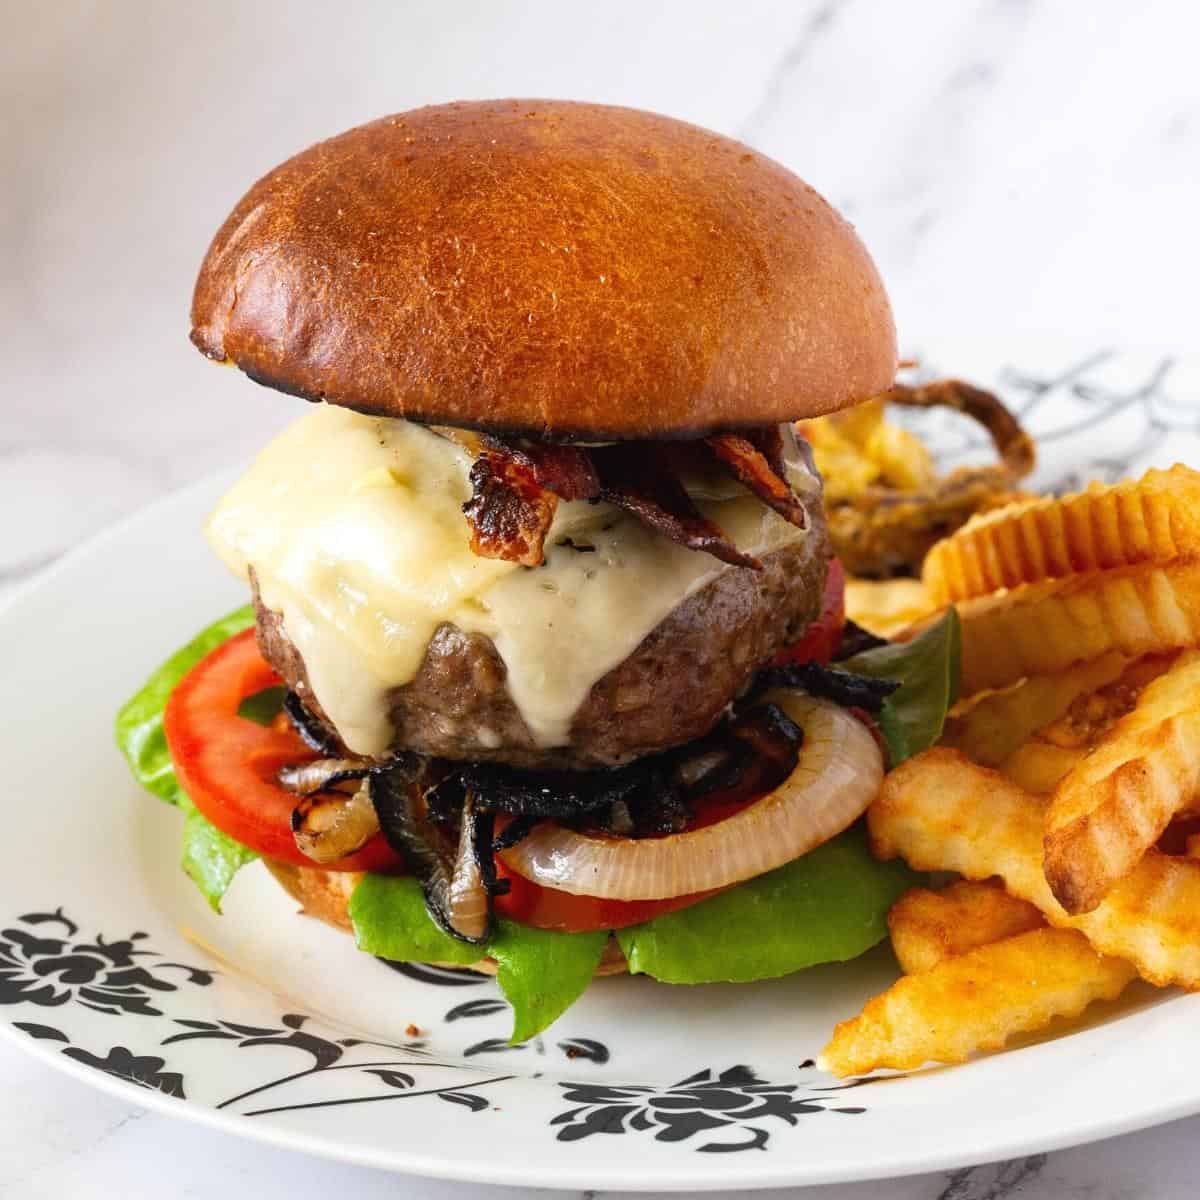 Classic Cheese Burger with Secret Sauce